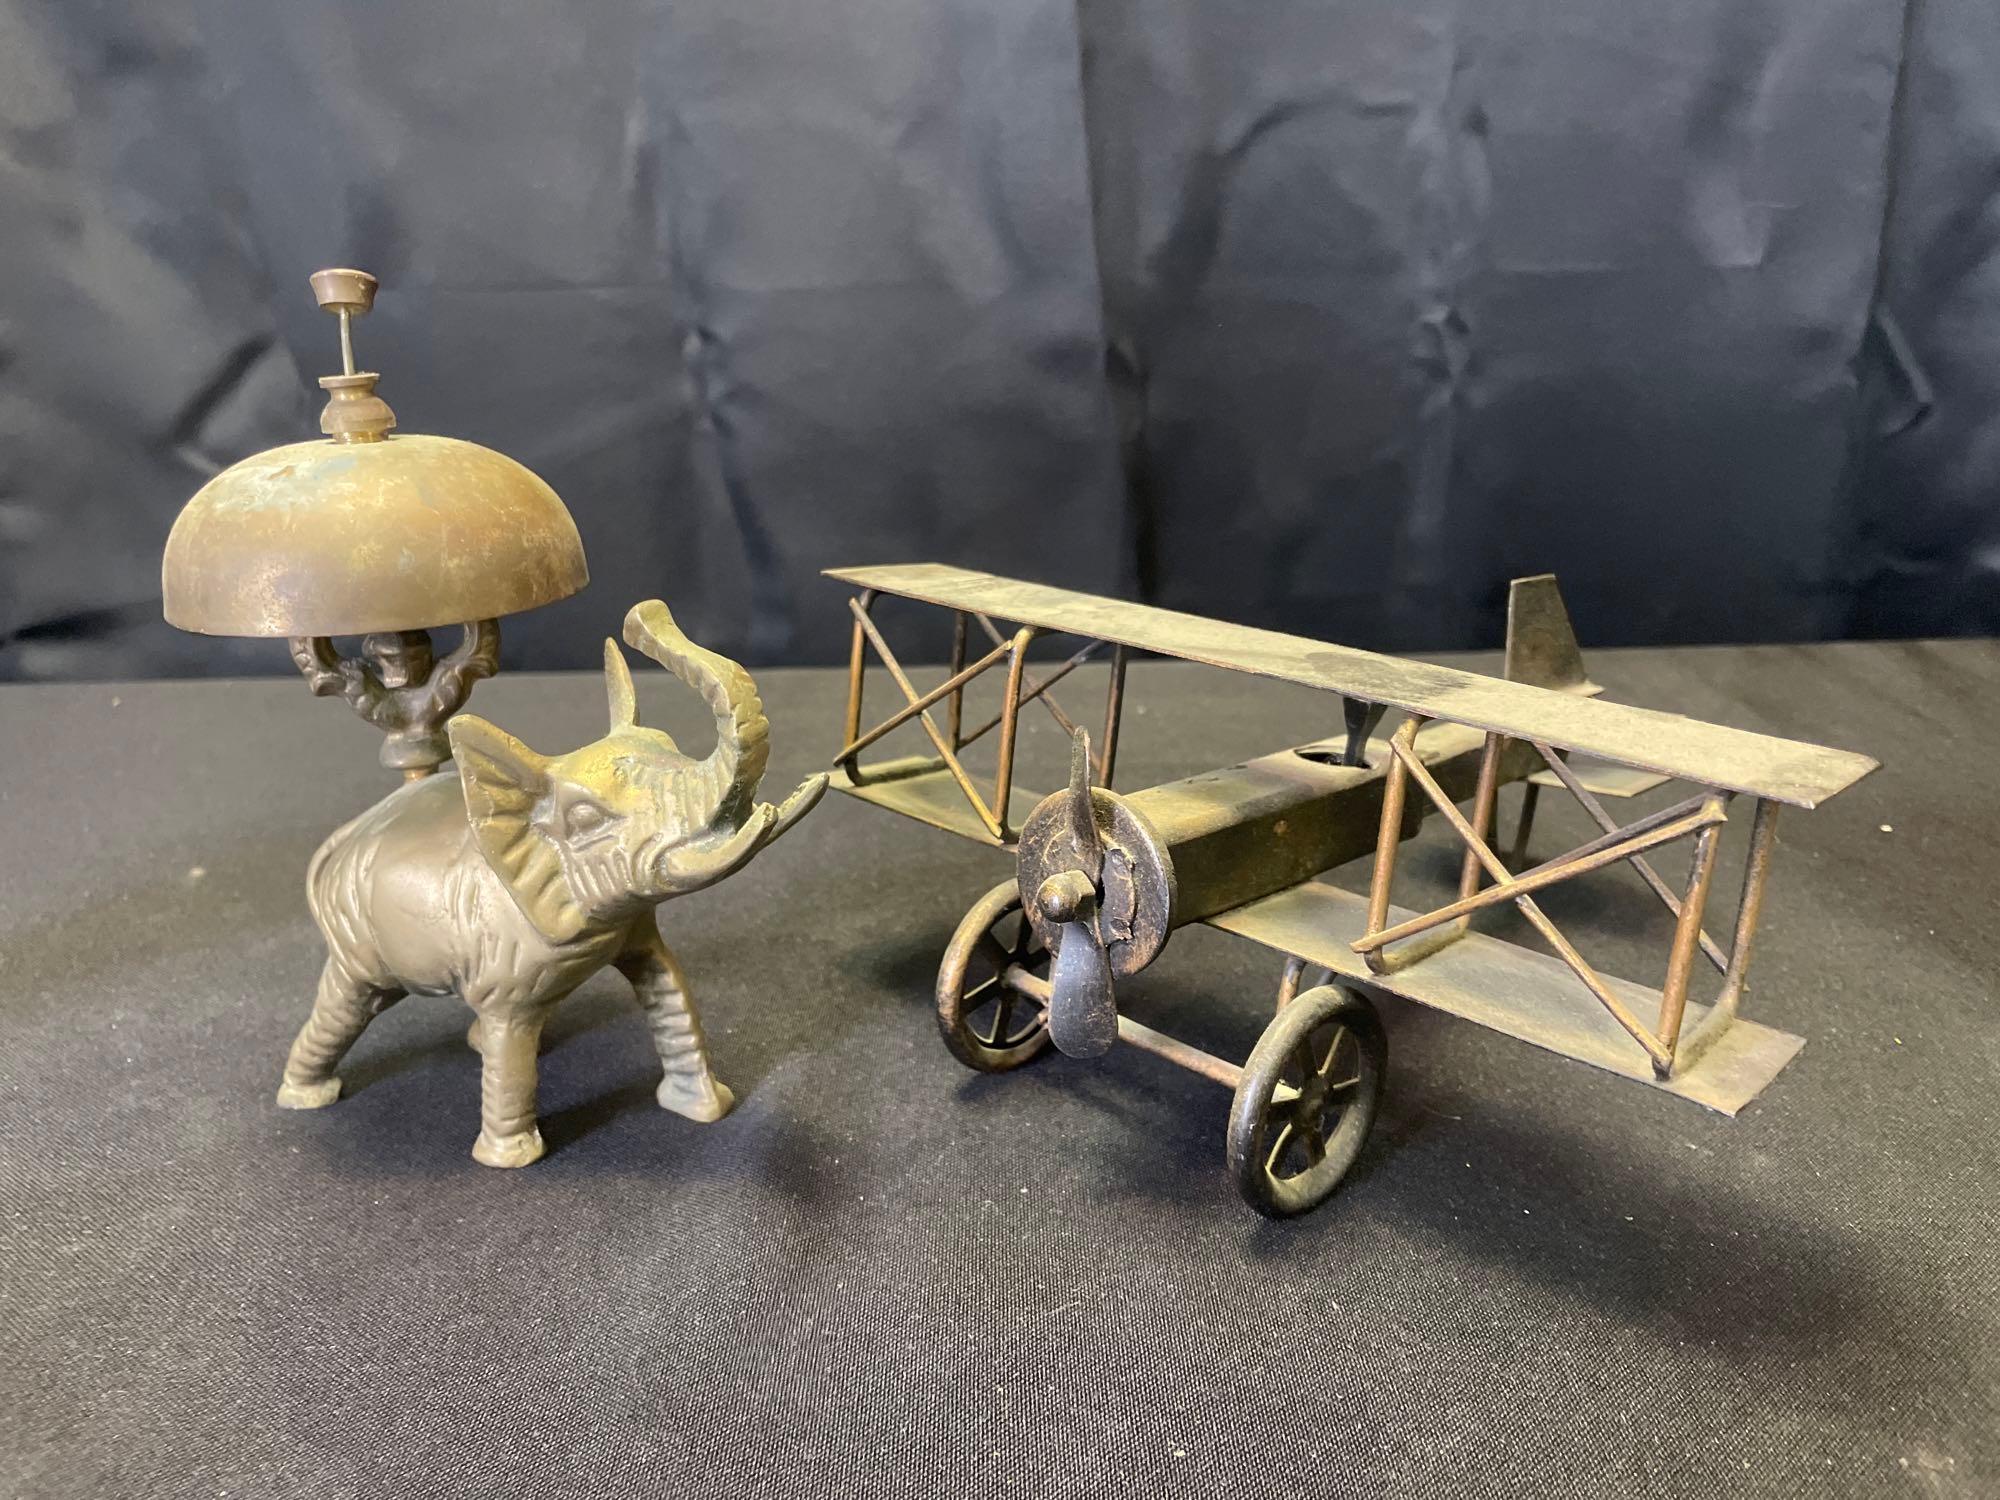 Copper etching, (2) Billy yank sculptures, brass Elephant, airplane, decanter